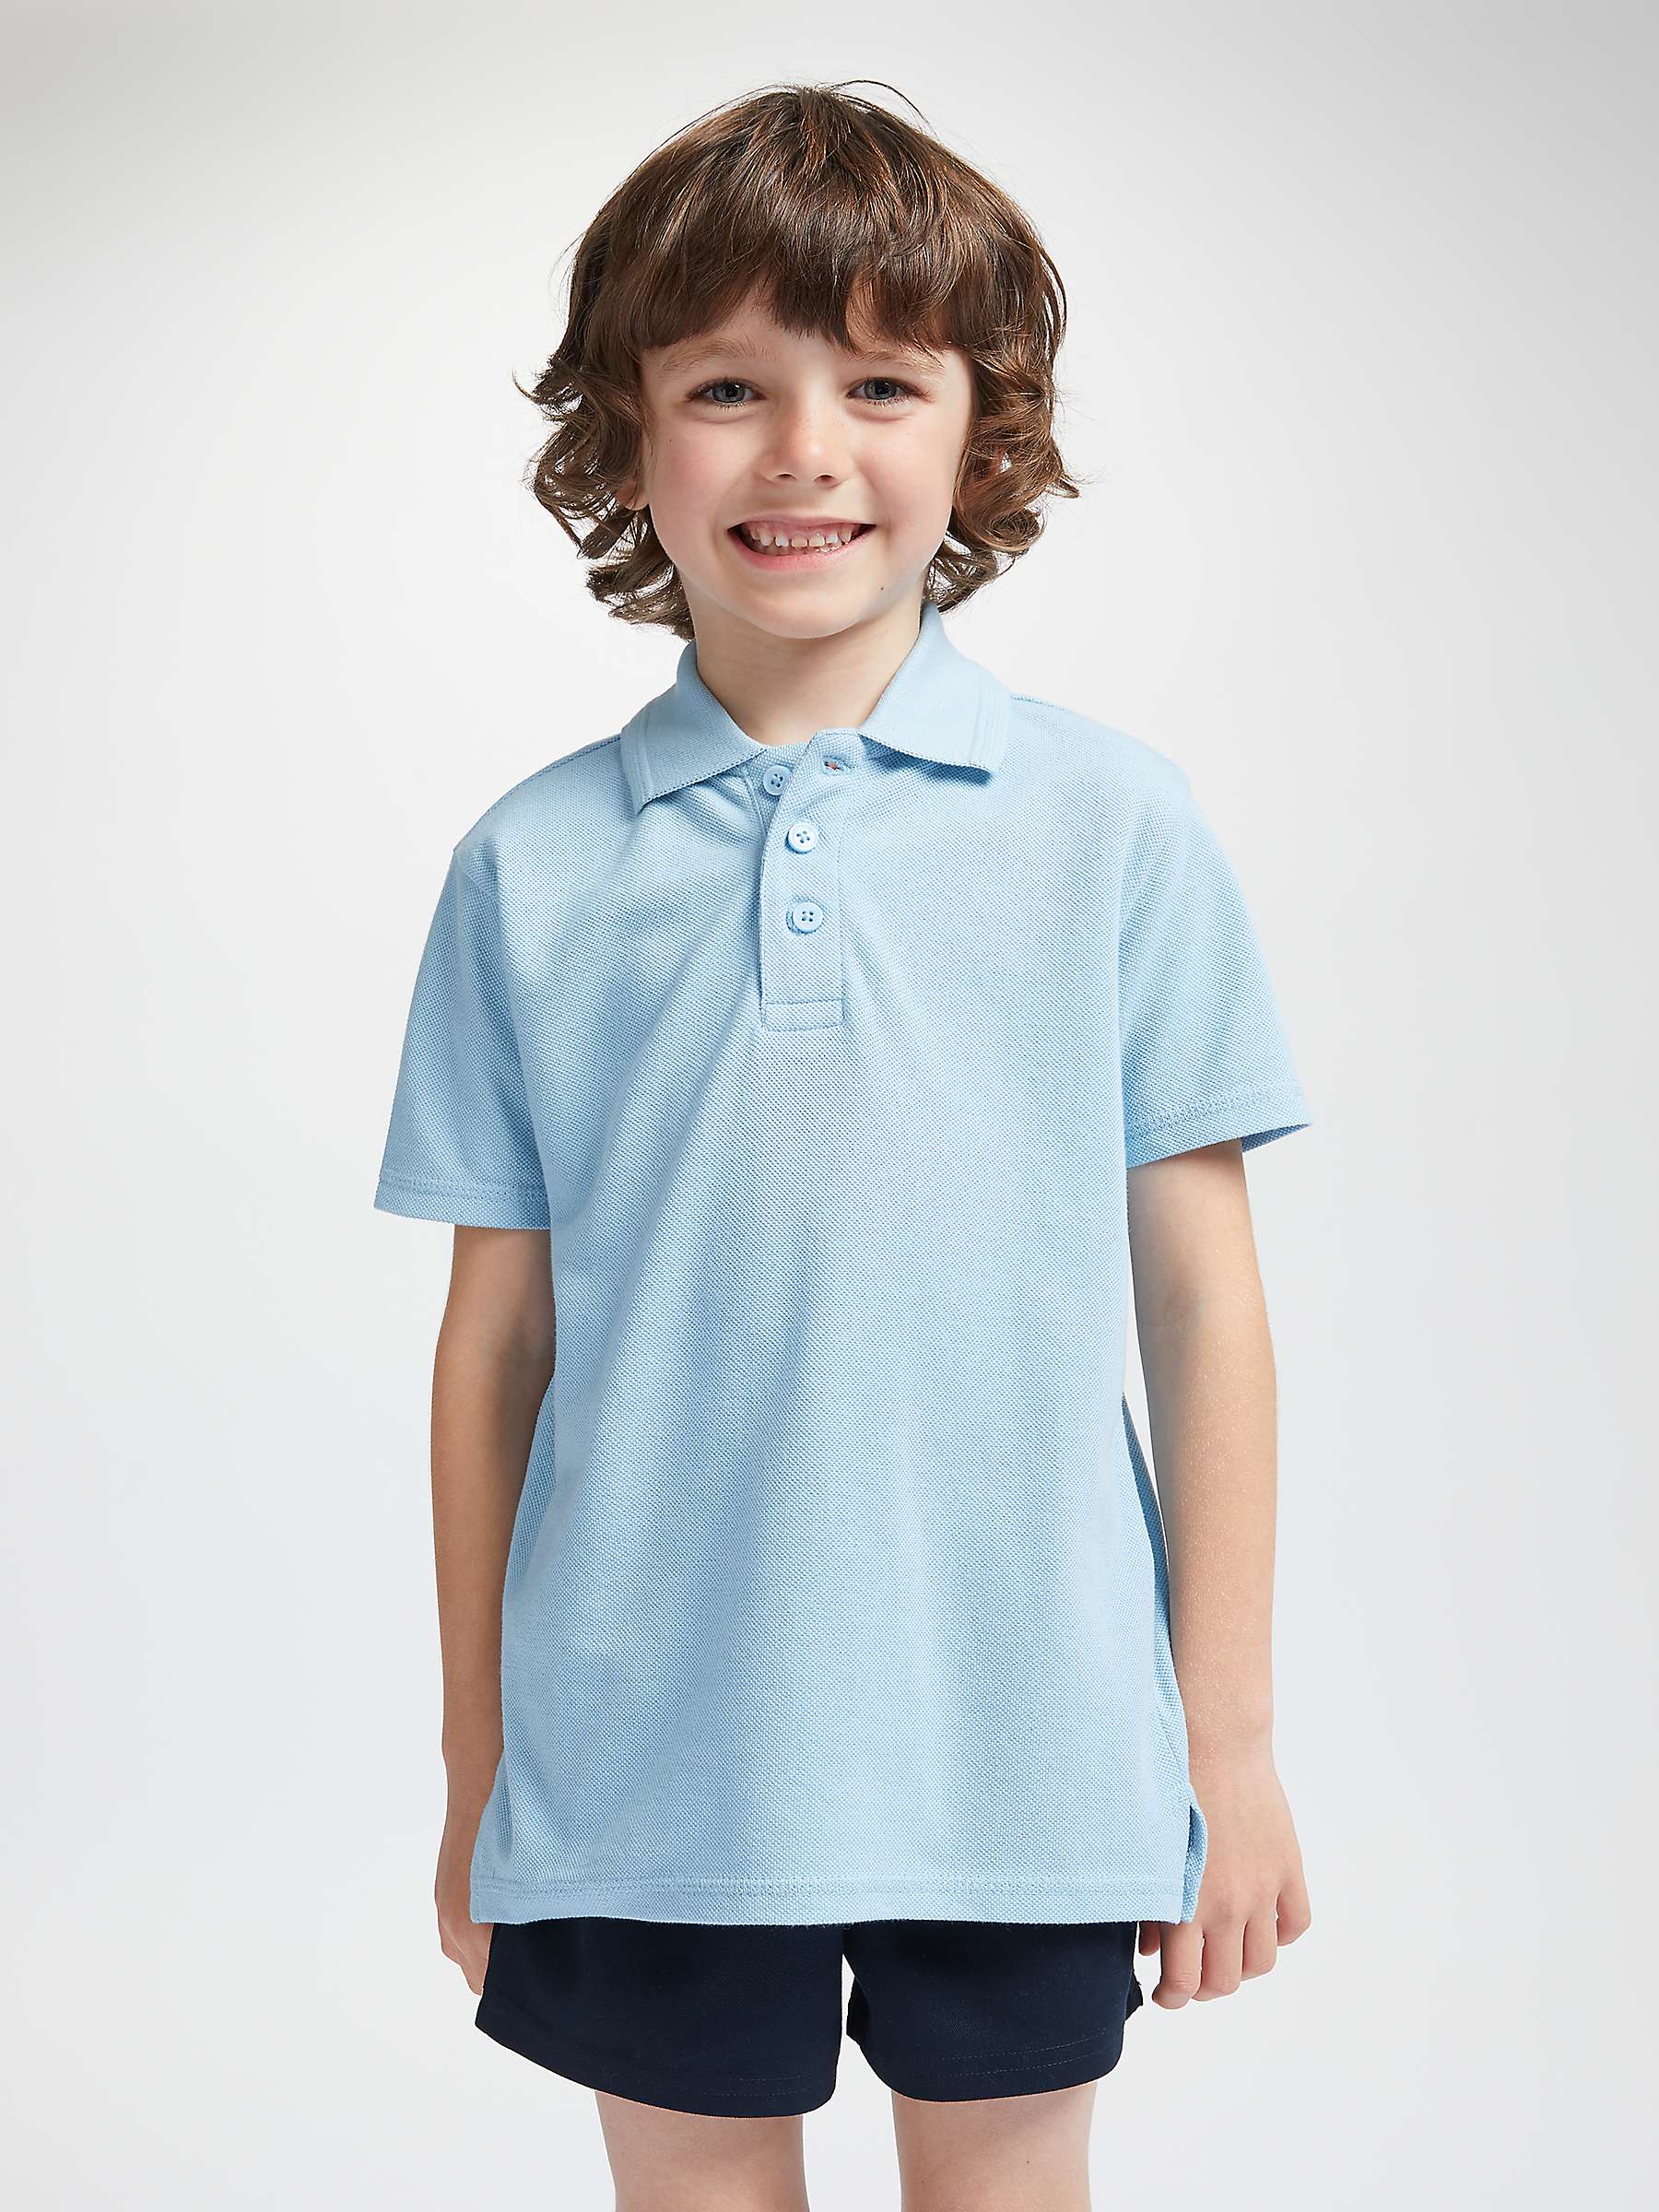 John Lewis Unisex Pure Cotton Easy Care School Polo Shirt, Pack of 2 ...